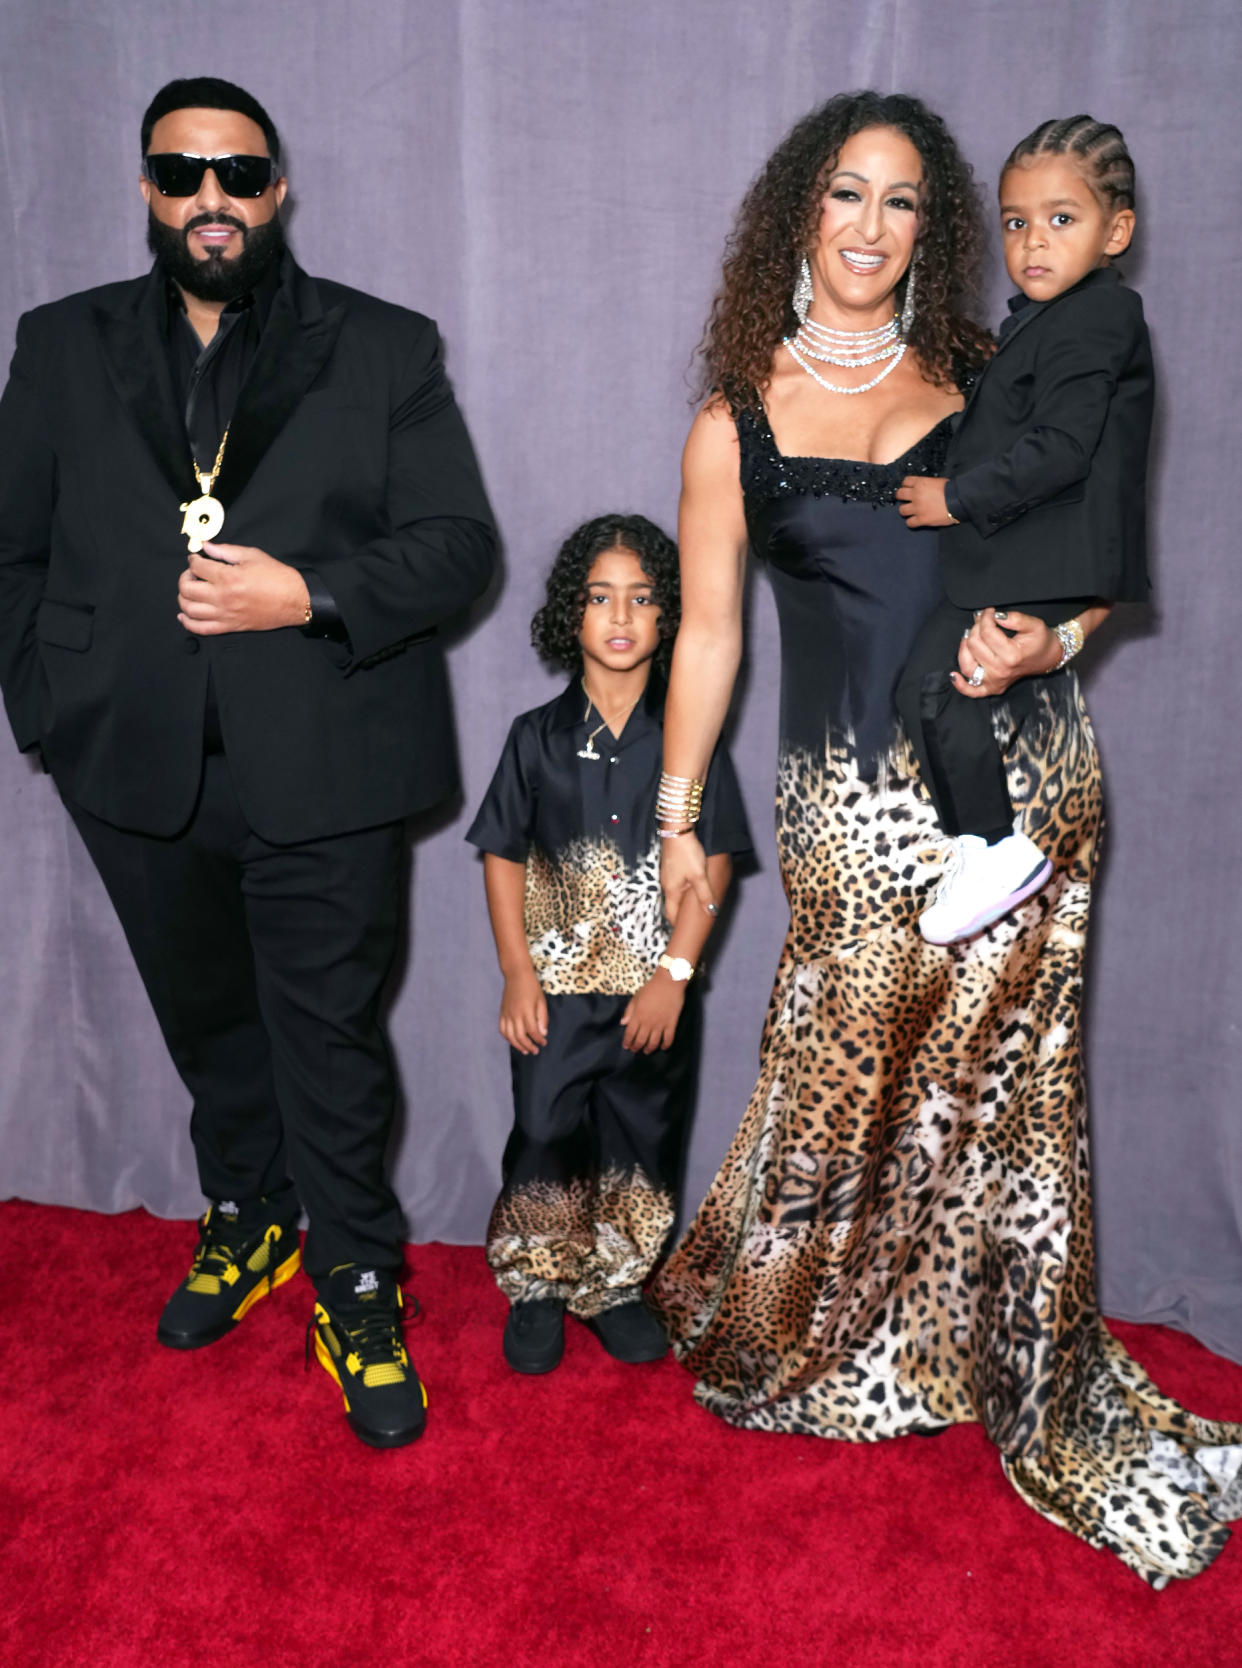 DJ Khaled, Asahd Khaled, Nicole Tuck, and Aalam Khaled at the 65th GRAMMY Awards. (Kevin Mazur / Getty Images)